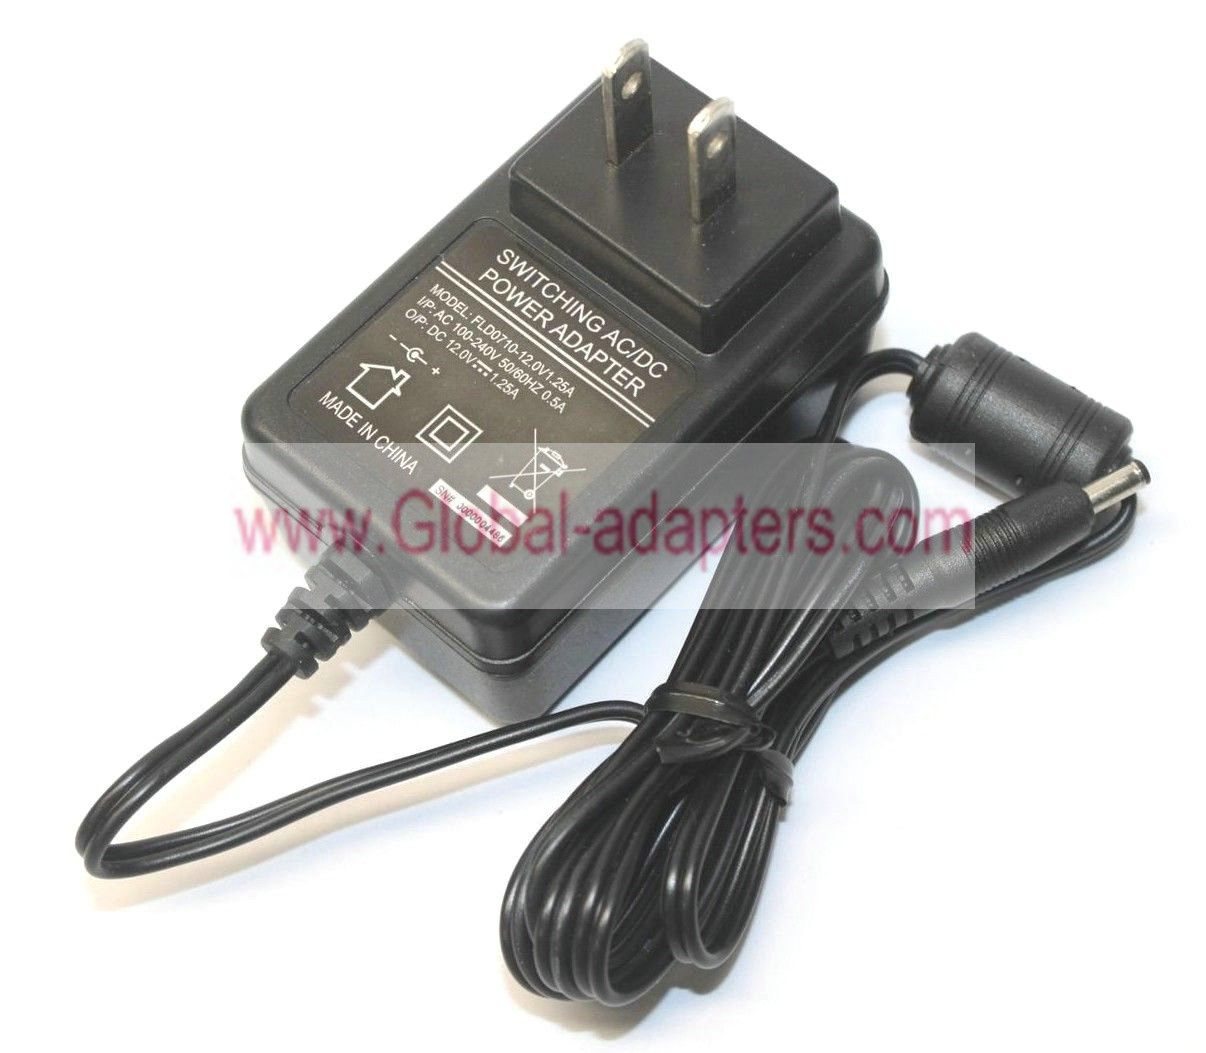 Brand new FLD0710-12.0V1.25A Switching Power Supply DC 12V 1.25A AC Adapter - Click Image to Close